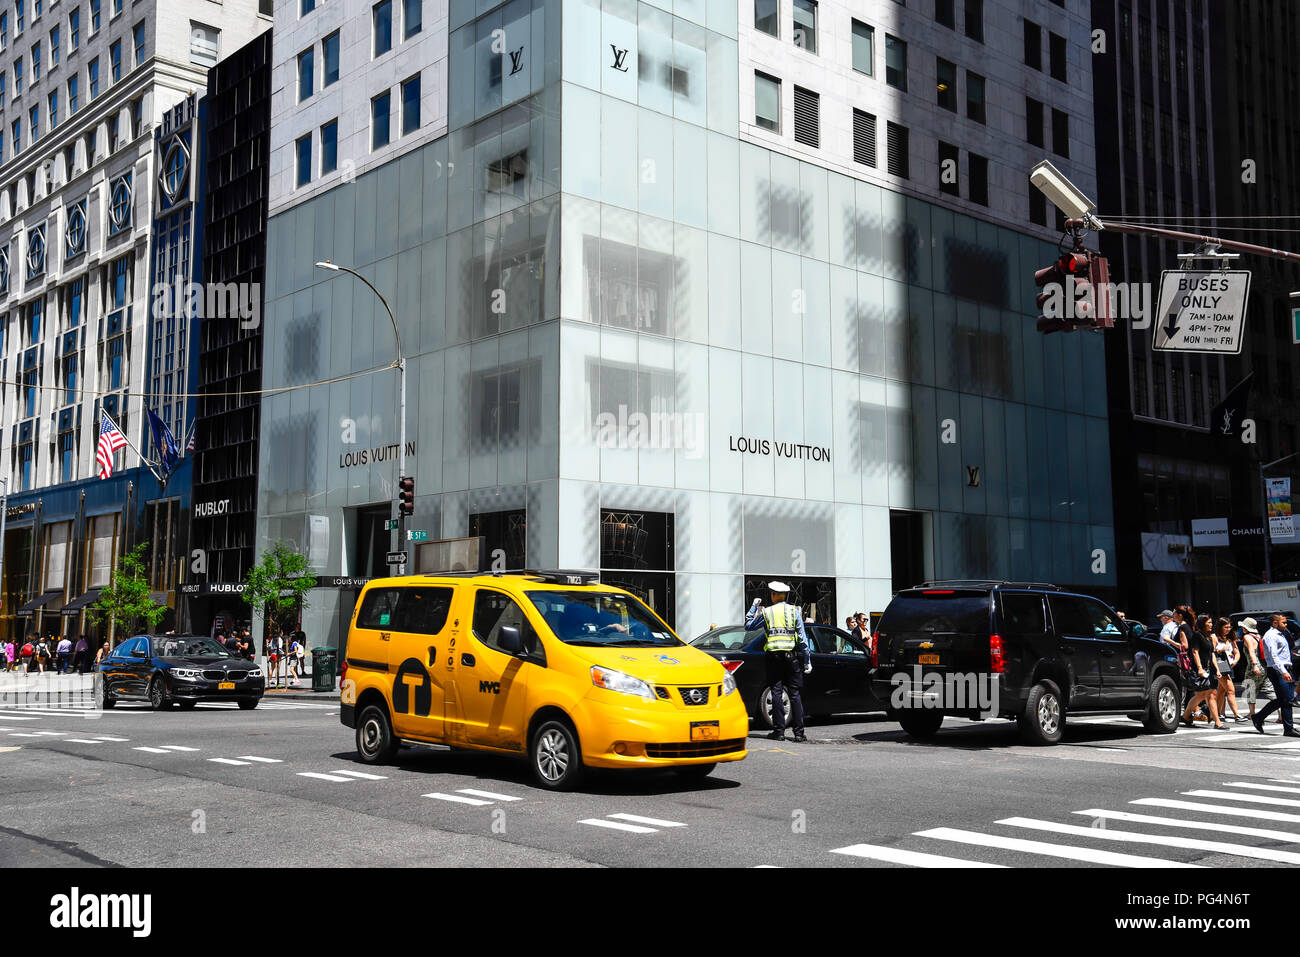 Louis vuitton store new york hi-res stock photography and images - Alamy